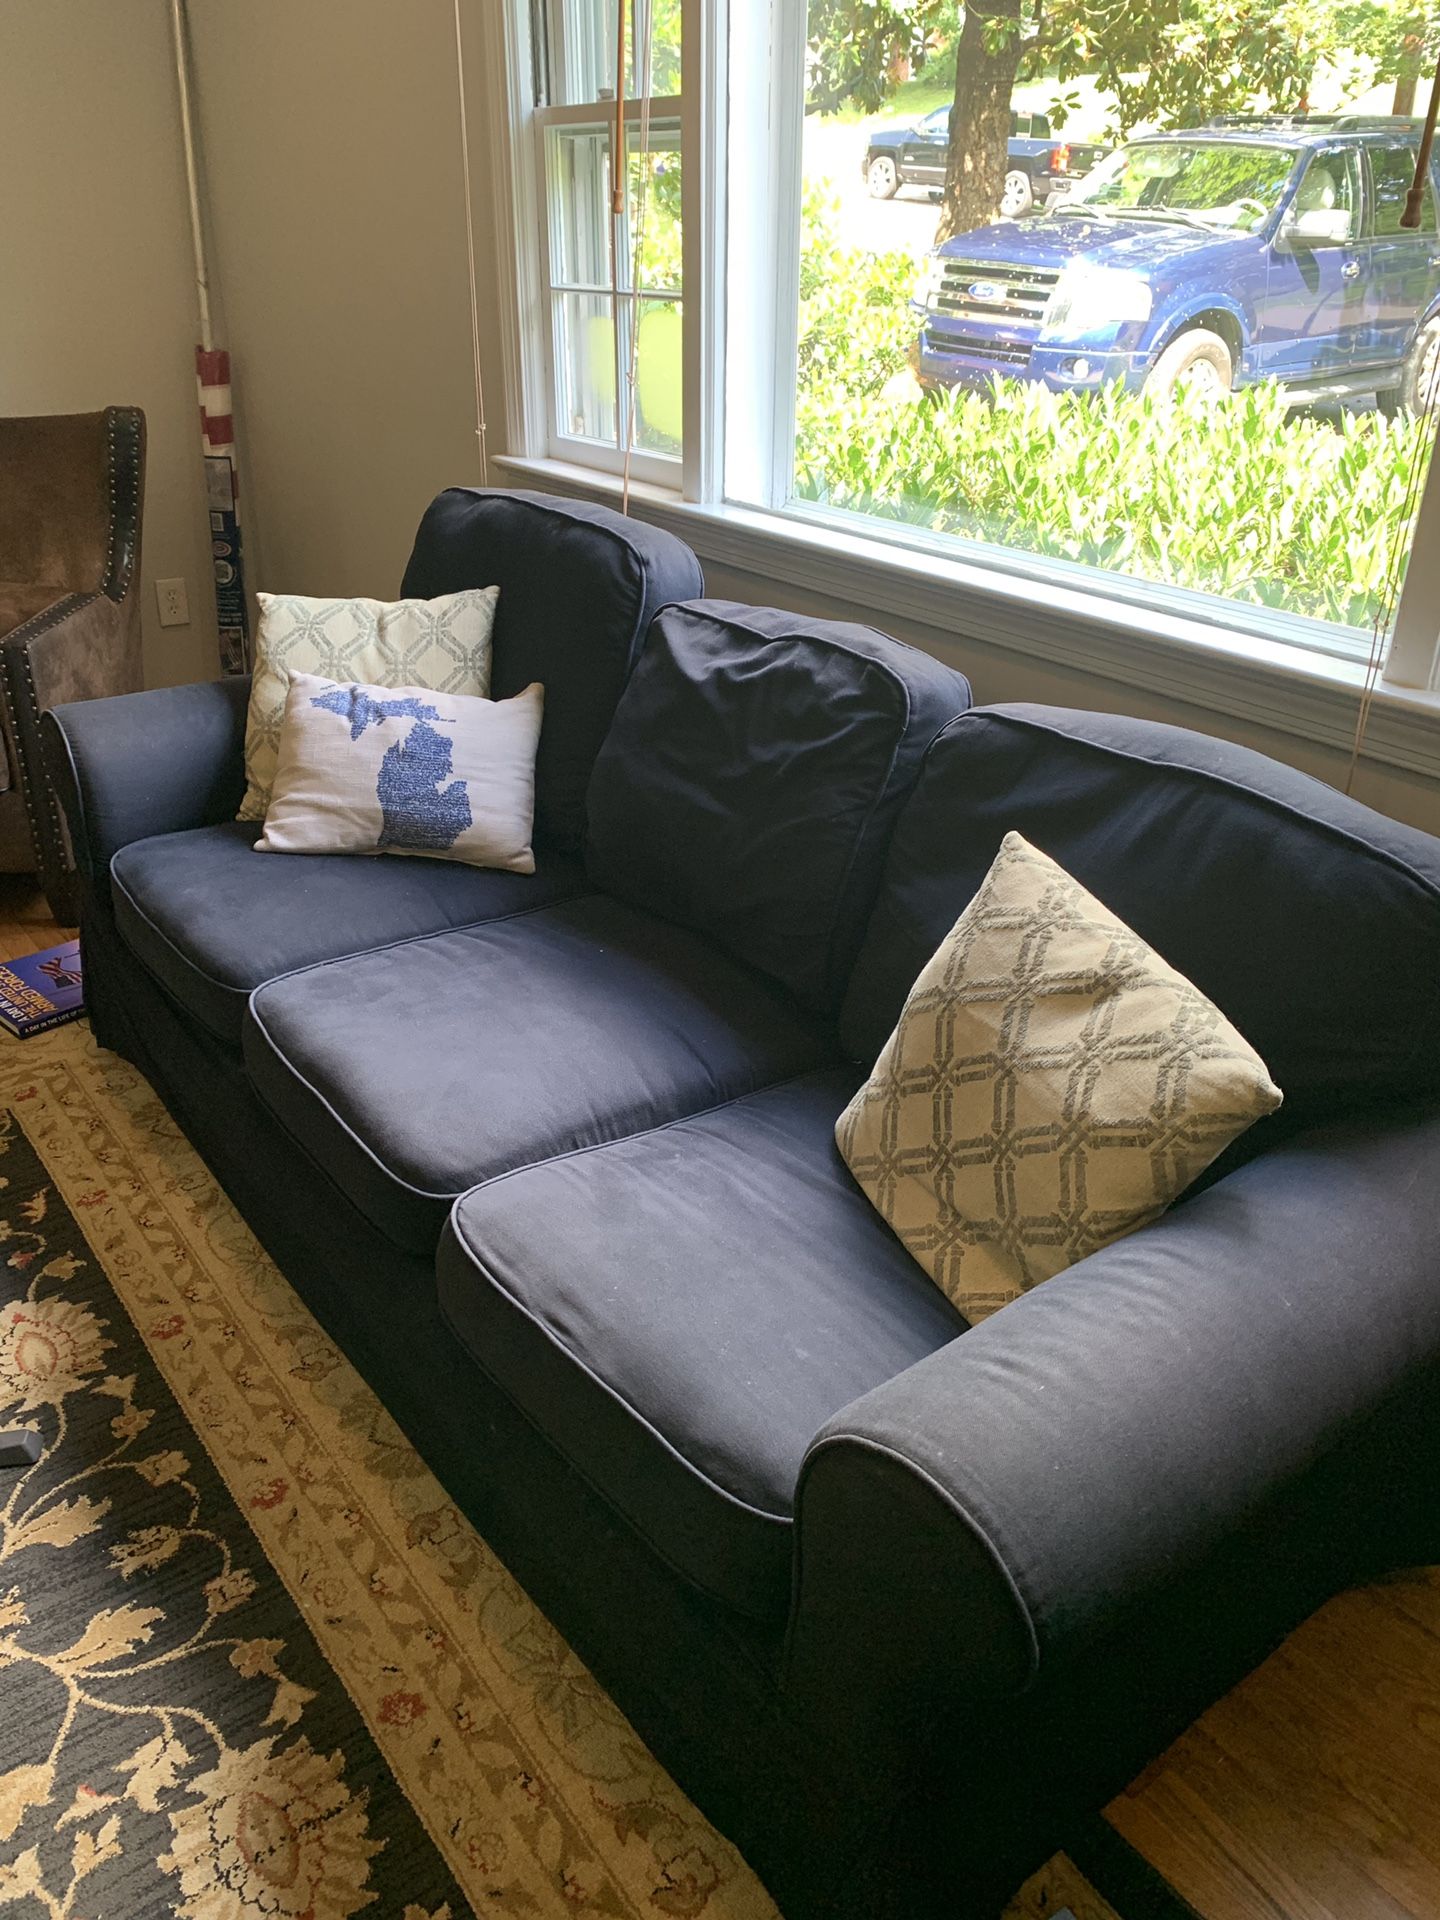 Free! Come get it! Navy couch in fair condition. 84 inches long. Cushion covers are washable and removable.